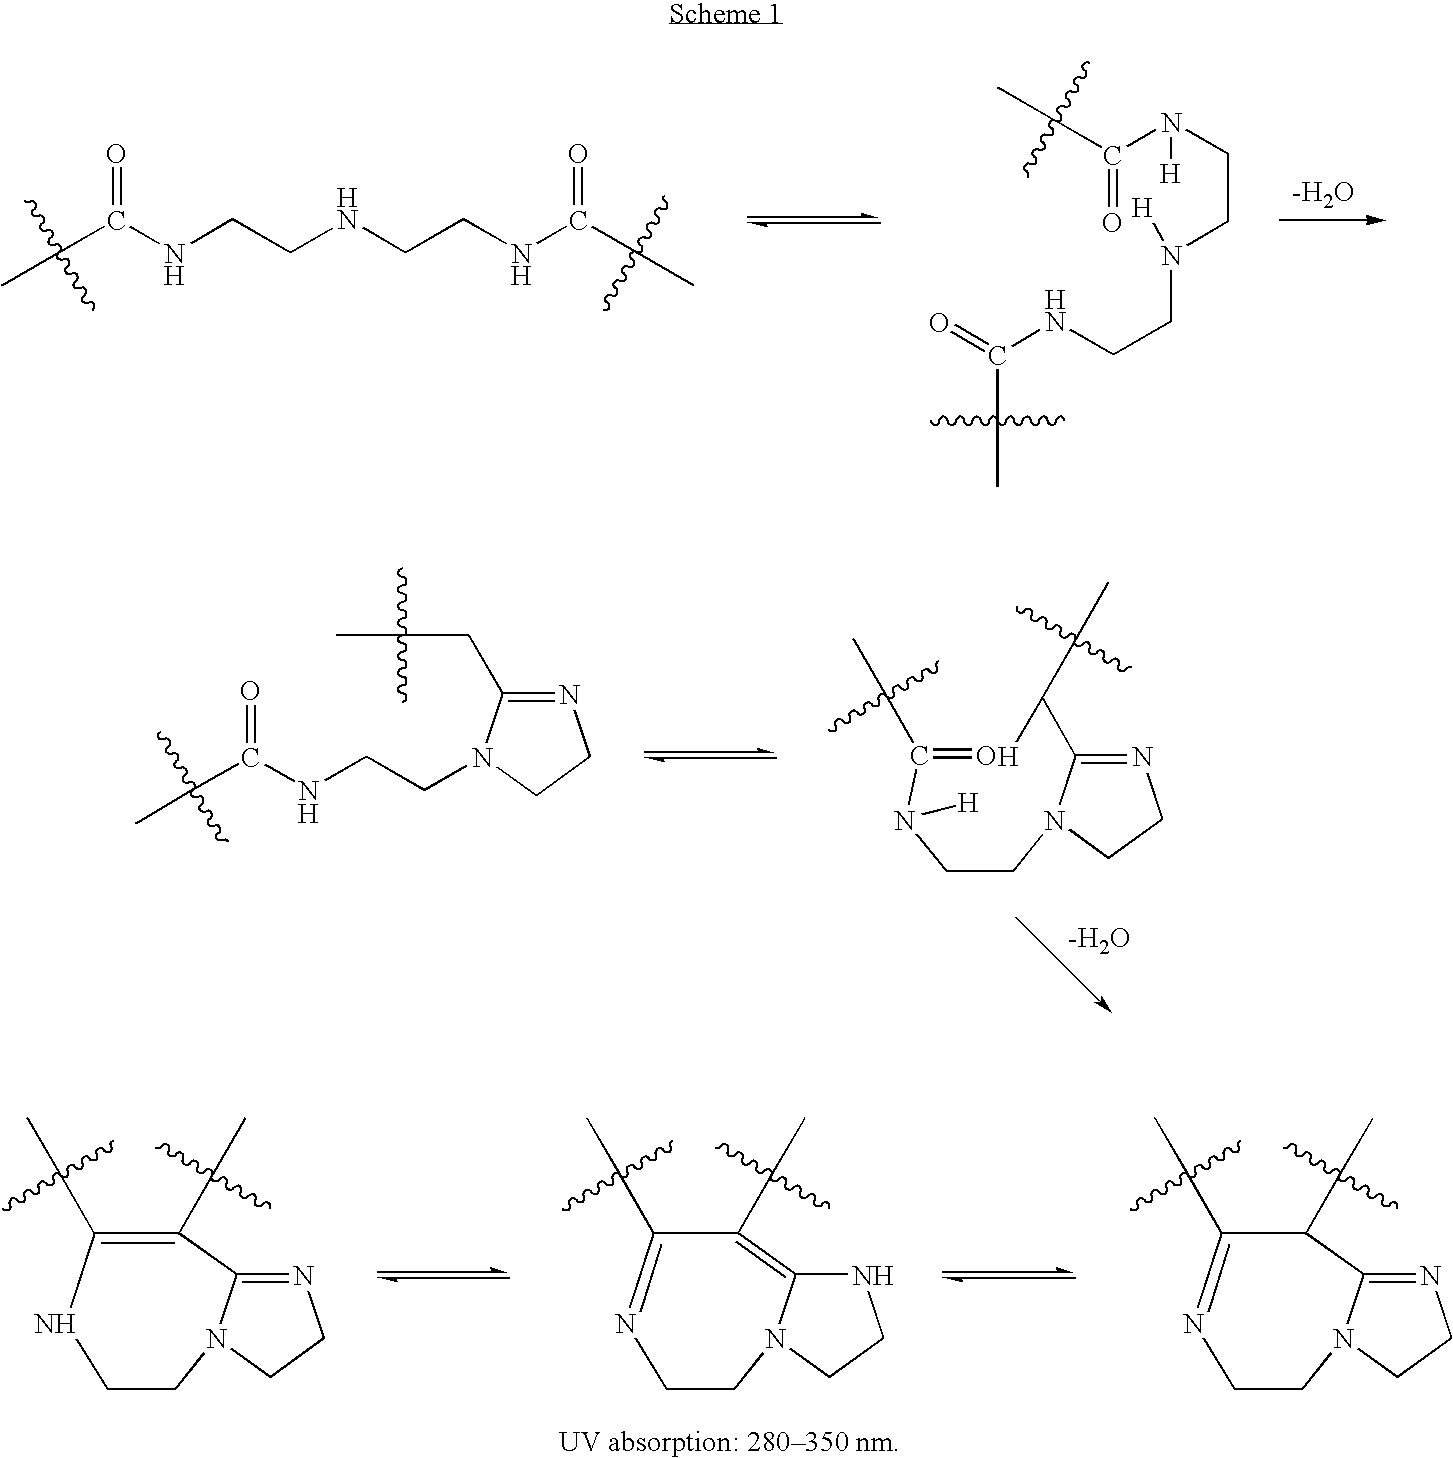 Water-soluble polyaminoamides comprising 1,3-diimines as sunscreen agents